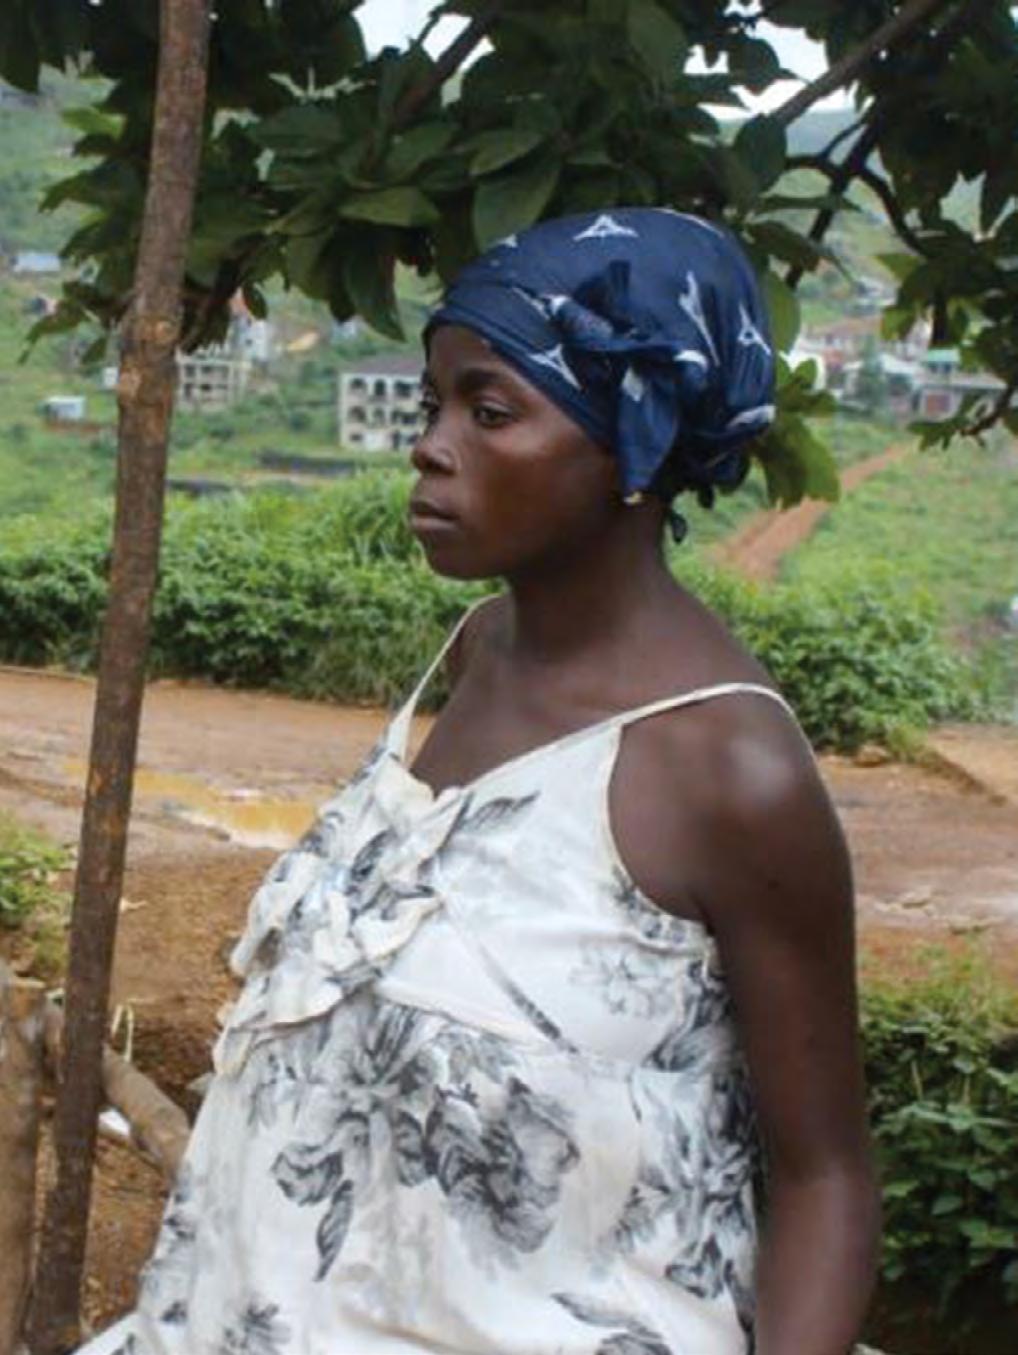 A landslide disaster survivor tells of her trauma and survival Martha Kamara at the Saio displacement site, Regent Regent, SIERRA LEONE- At around 5 o clock in the morning I left my house to go to